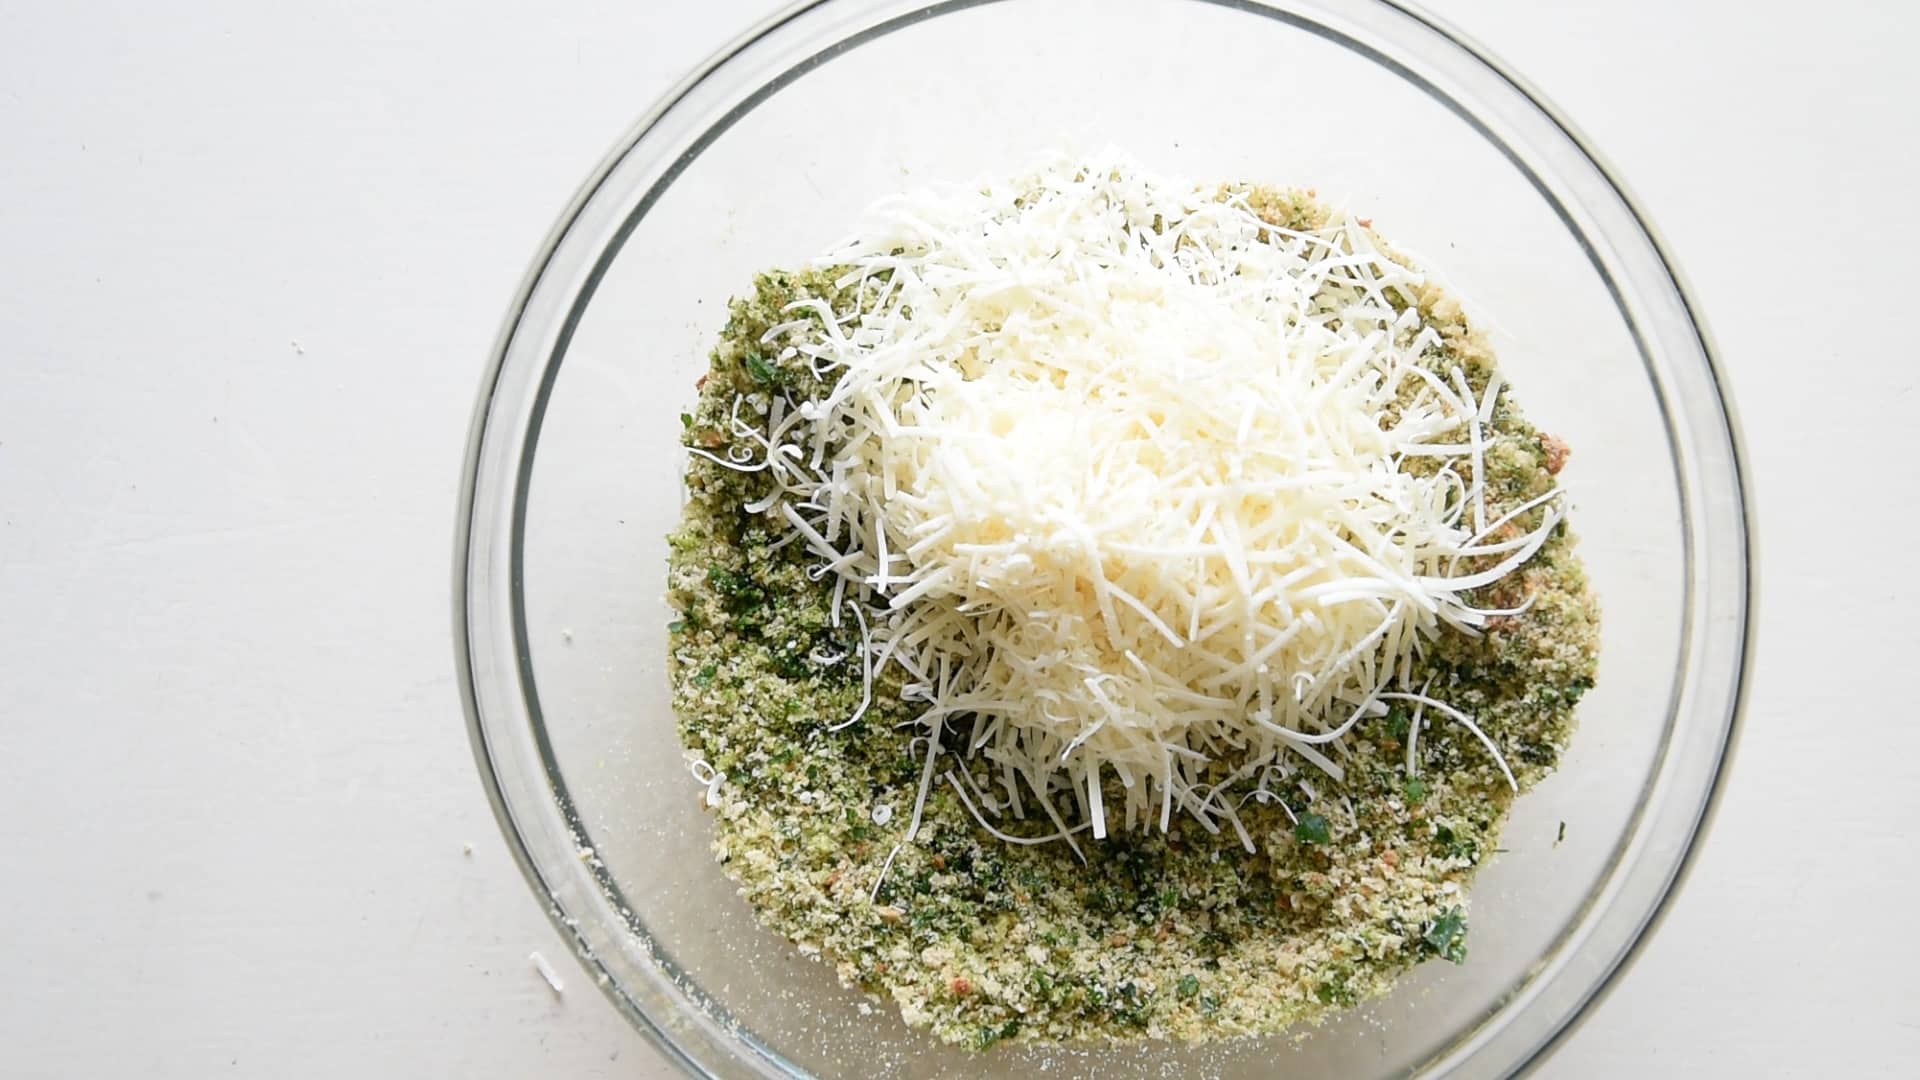 Once all the bread is grated, add the Parmesan cheese